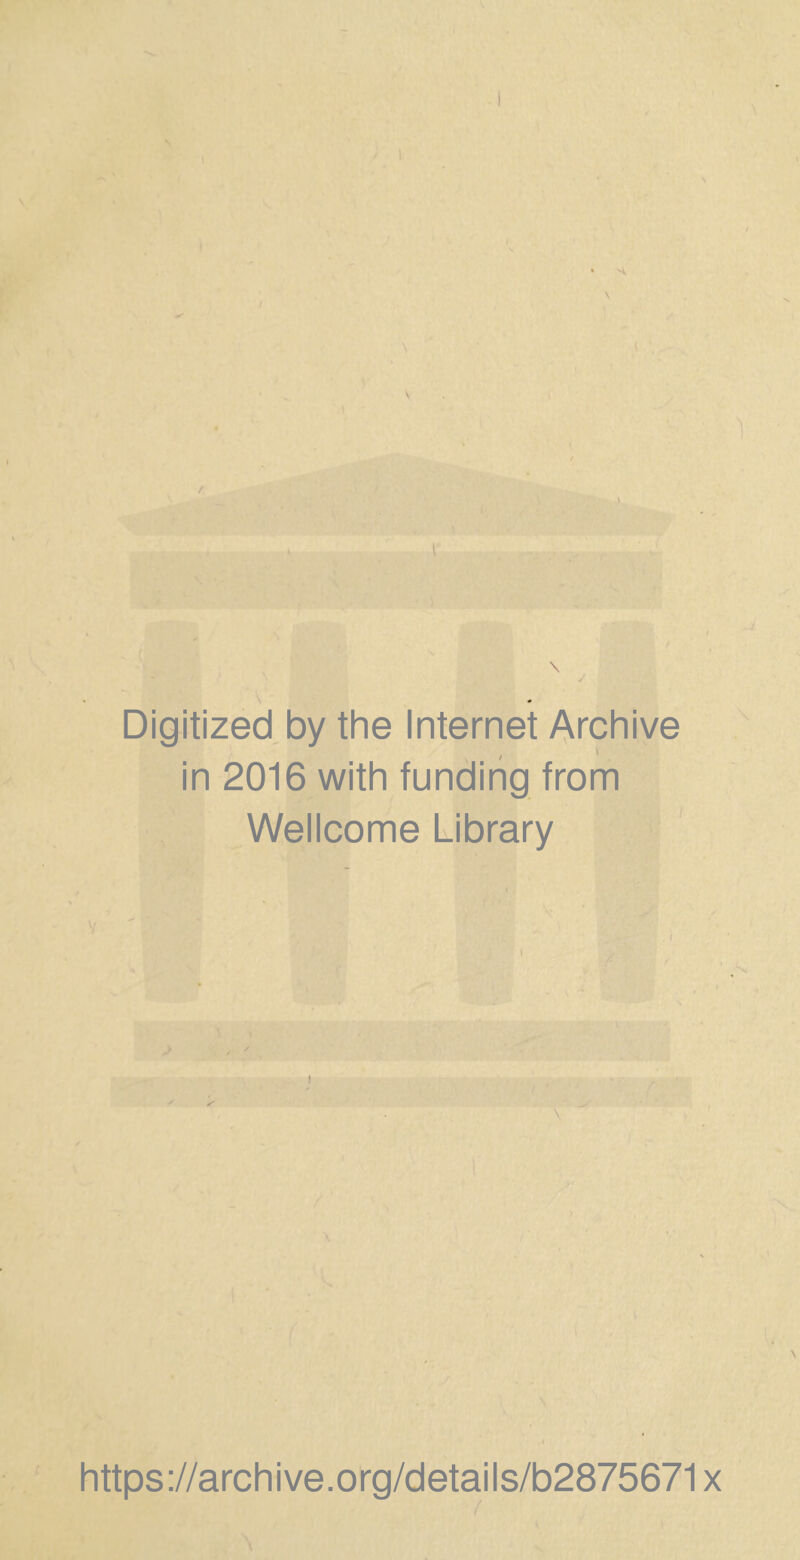 ♦ A \ \ Digitized by the Internet Archive in 2016 with funding from Wellcome Library https://archive.org/details/b2875671x